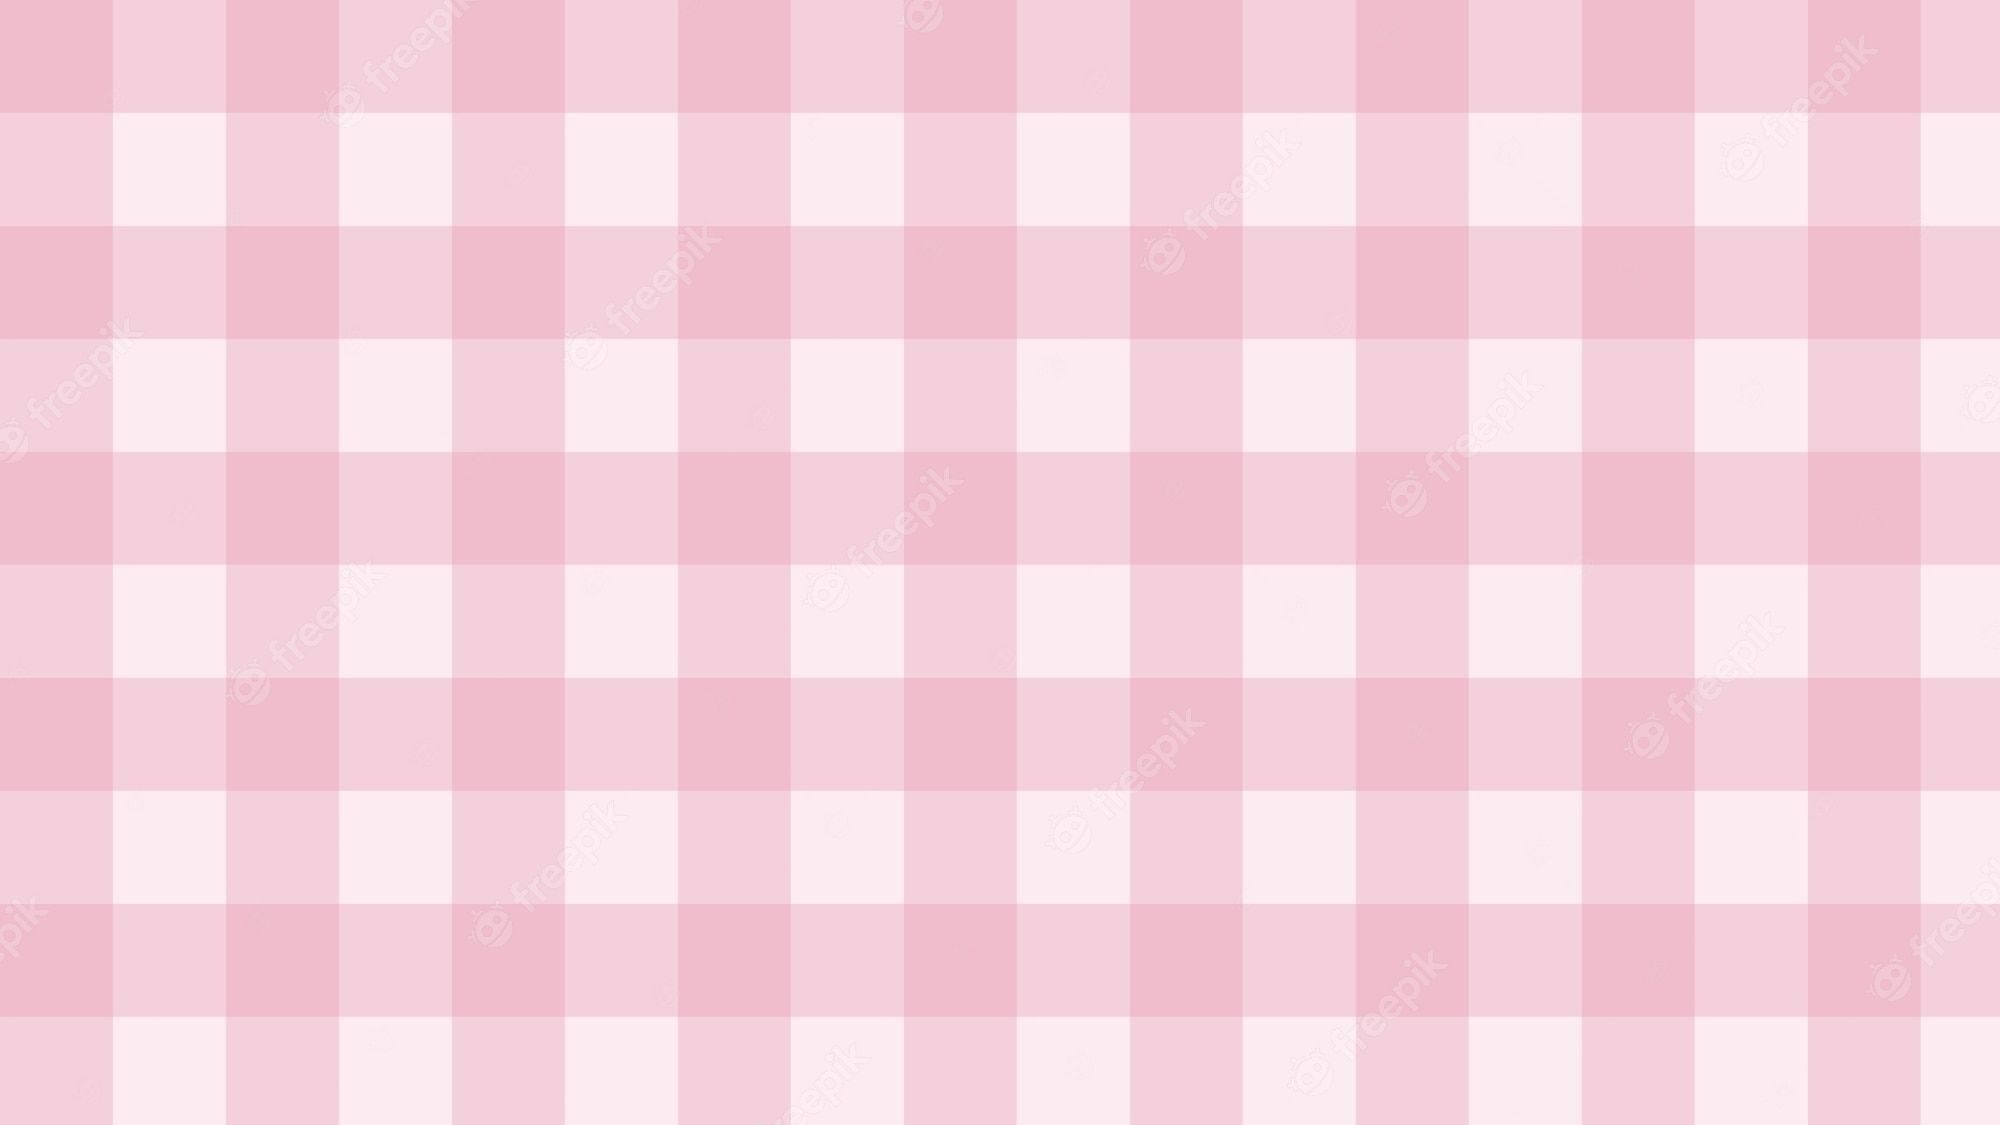 Premium Vector. Aesthetic pastel pink gingham checkers cute checkerboard wallpaper illustration perfect for banner wallpaper backdrop postcard background for your design